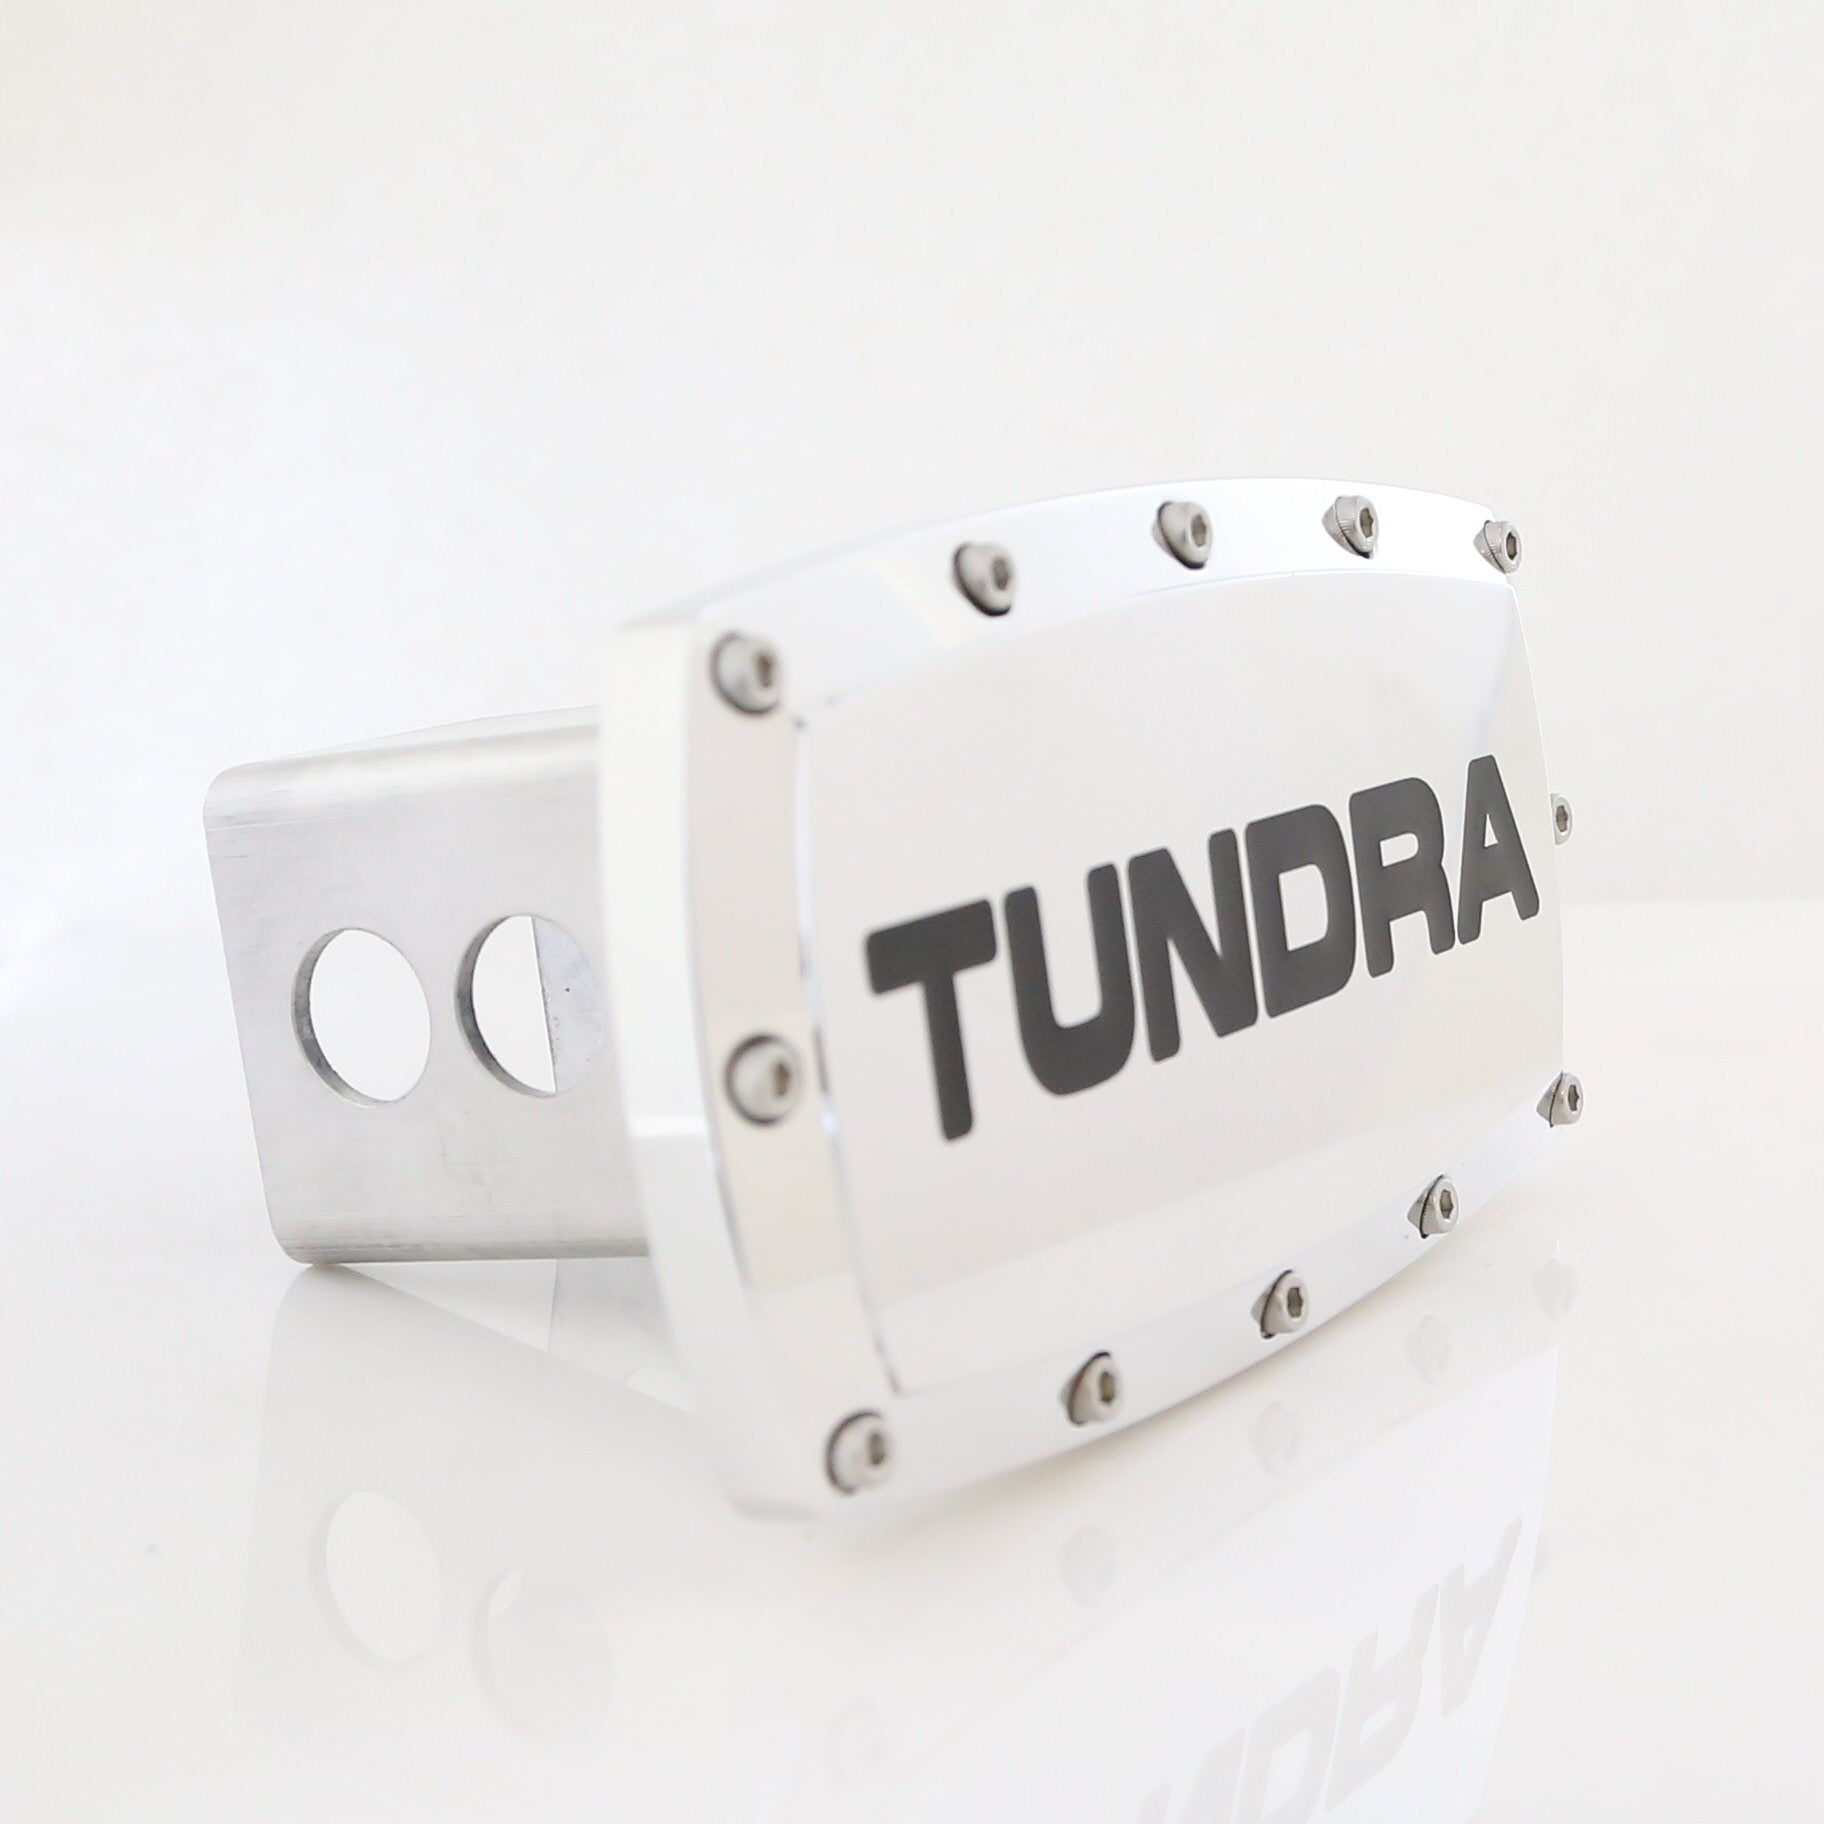 Toyota Tundra Hitch Cover